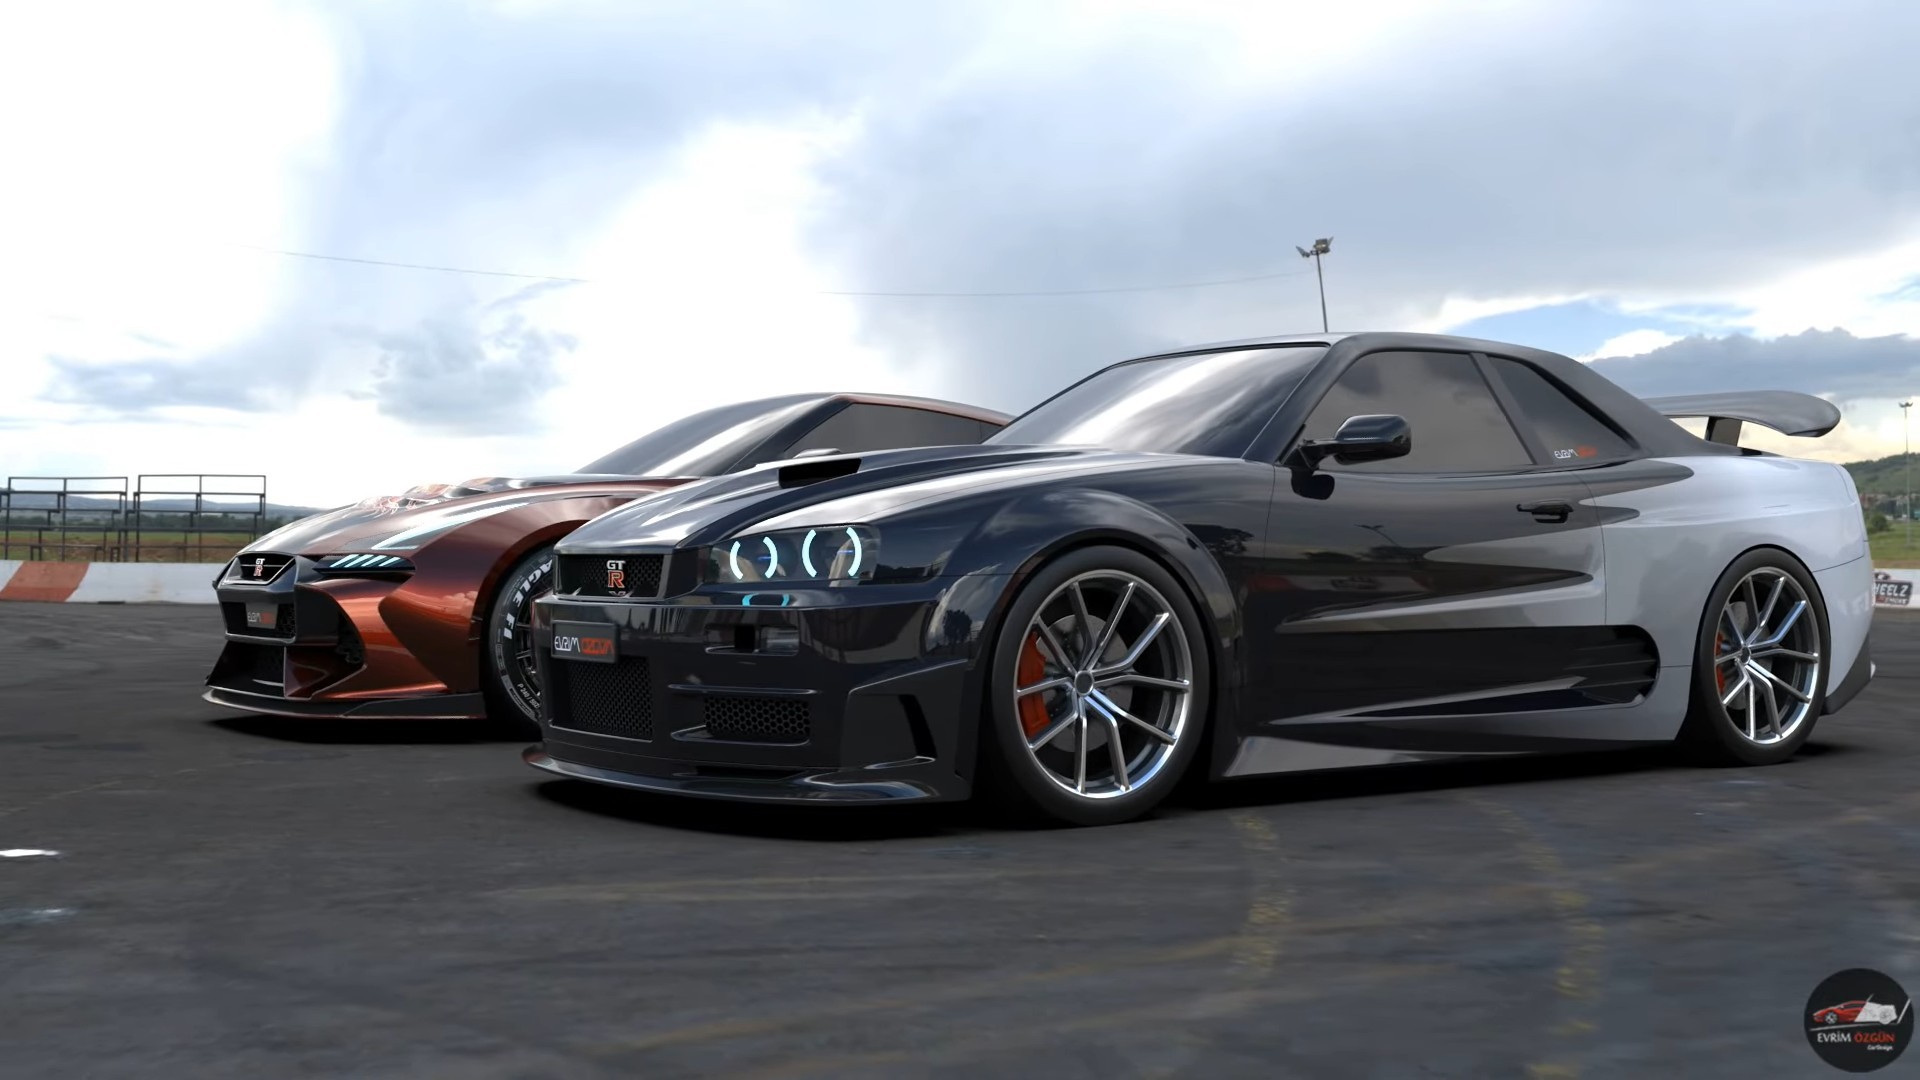 Iconic R34 Skyline GT-R Meets All-New R36 Nissan GT-R Heir - In a